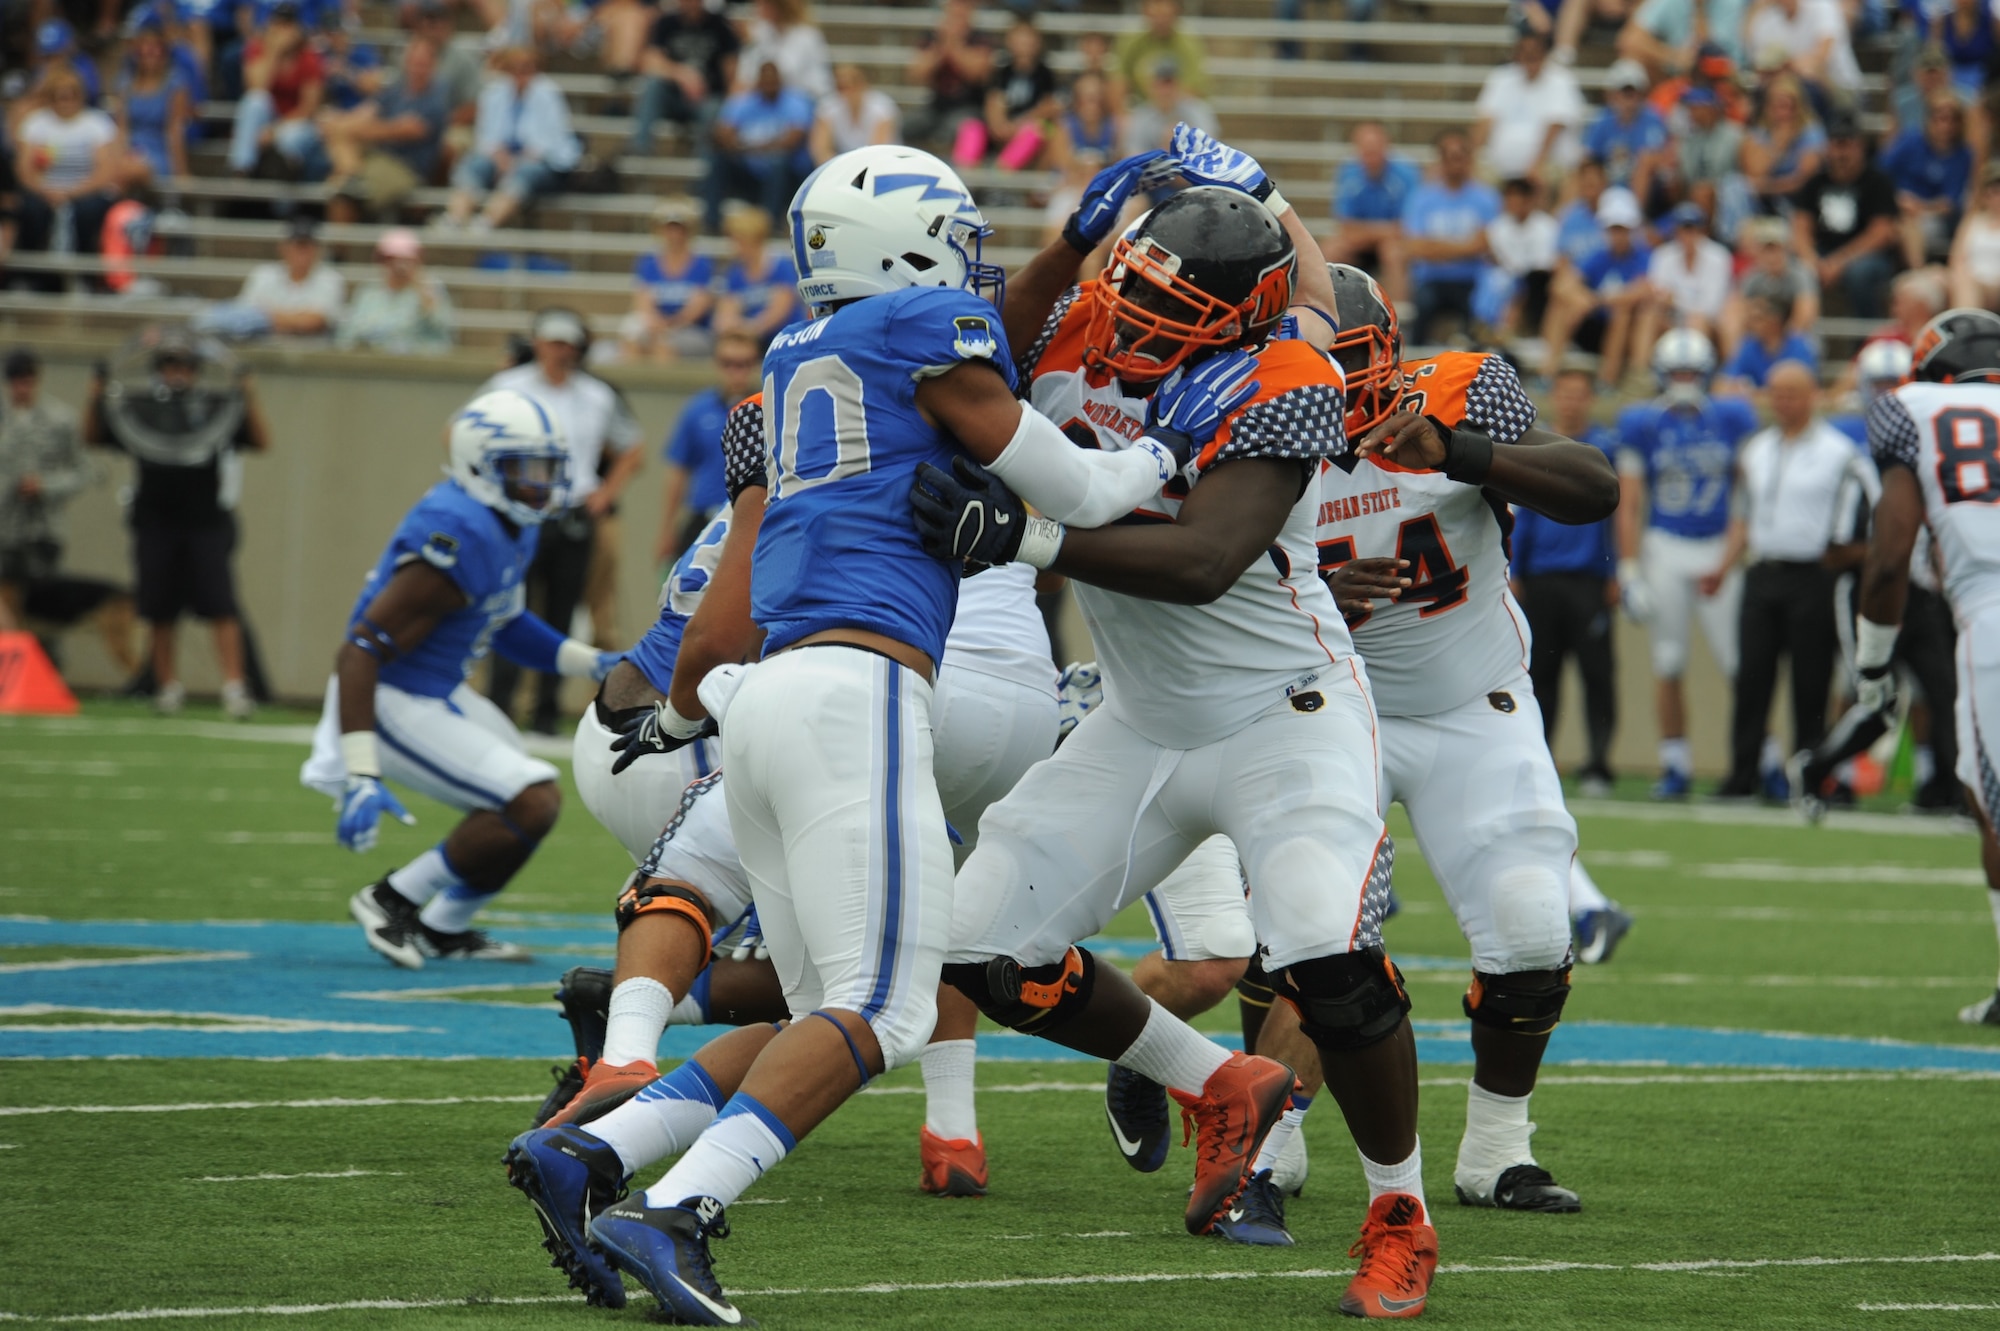 Air Force Academy defensive end Ryan Watson, left, pushes the left tackle back while trying to read the quarterback’s play, during the Academy’s 2015 win over Morgan State University. Watson played three seasons at defensive end and one at outside linebacker at the Air Force Academy, and registered eight sacks during his senior year. Now a program manager with AFLCMC, Watson has been invited to showcase his defensive skills at the Detroit Lions rookie minicamp, May 10-13. (U.S. Air Force photo/John Van Winkle).